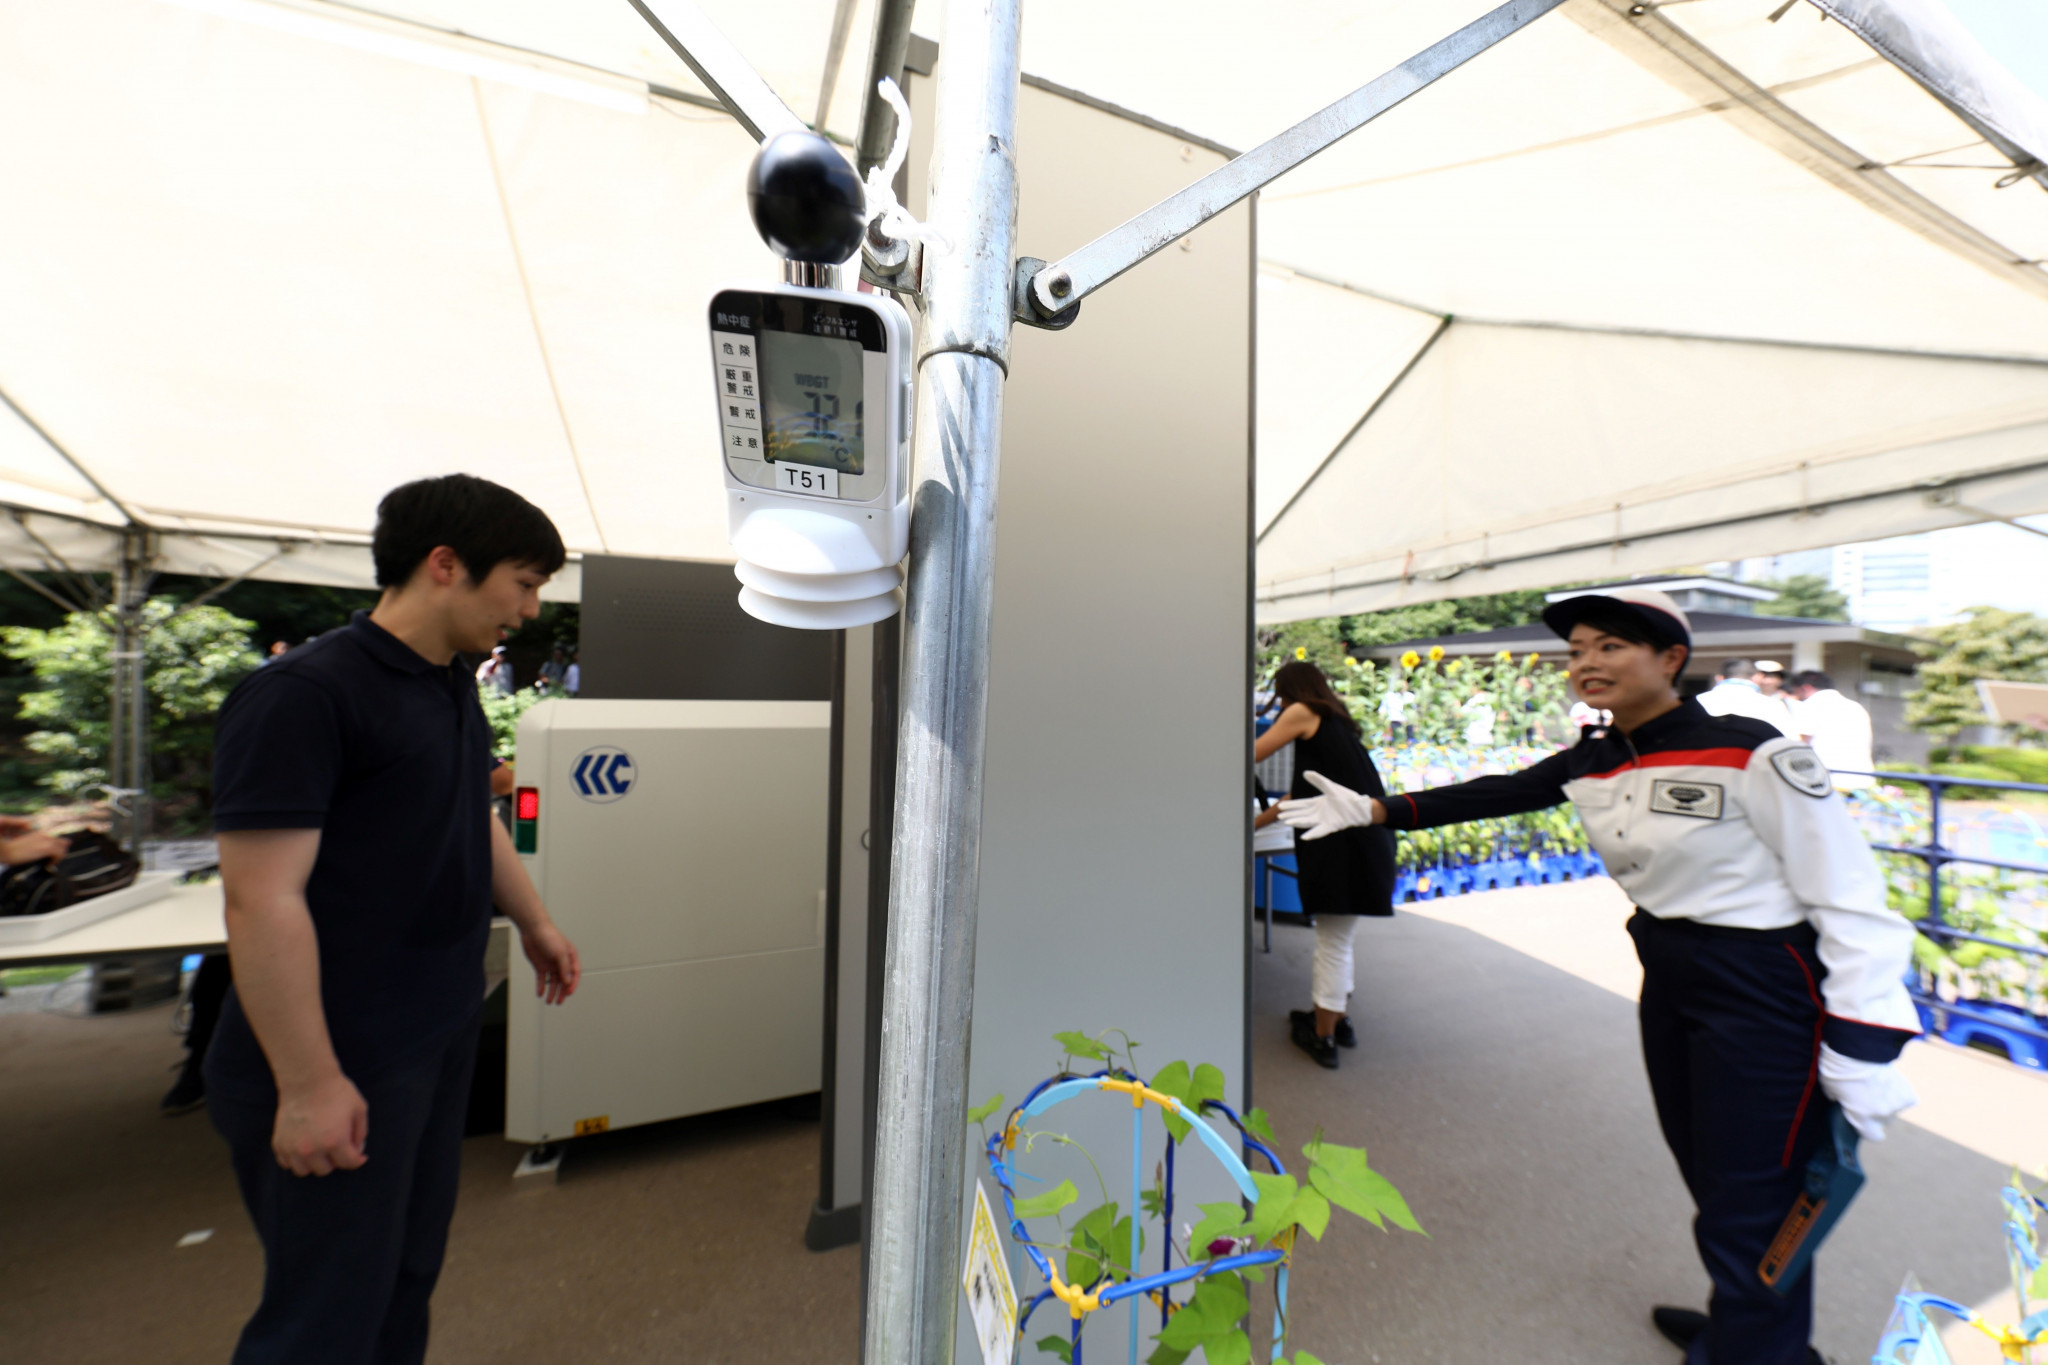 Tokyo 2020 has been testing security measures in preparation for the Olympic and Paralympic Games ©Getty Images